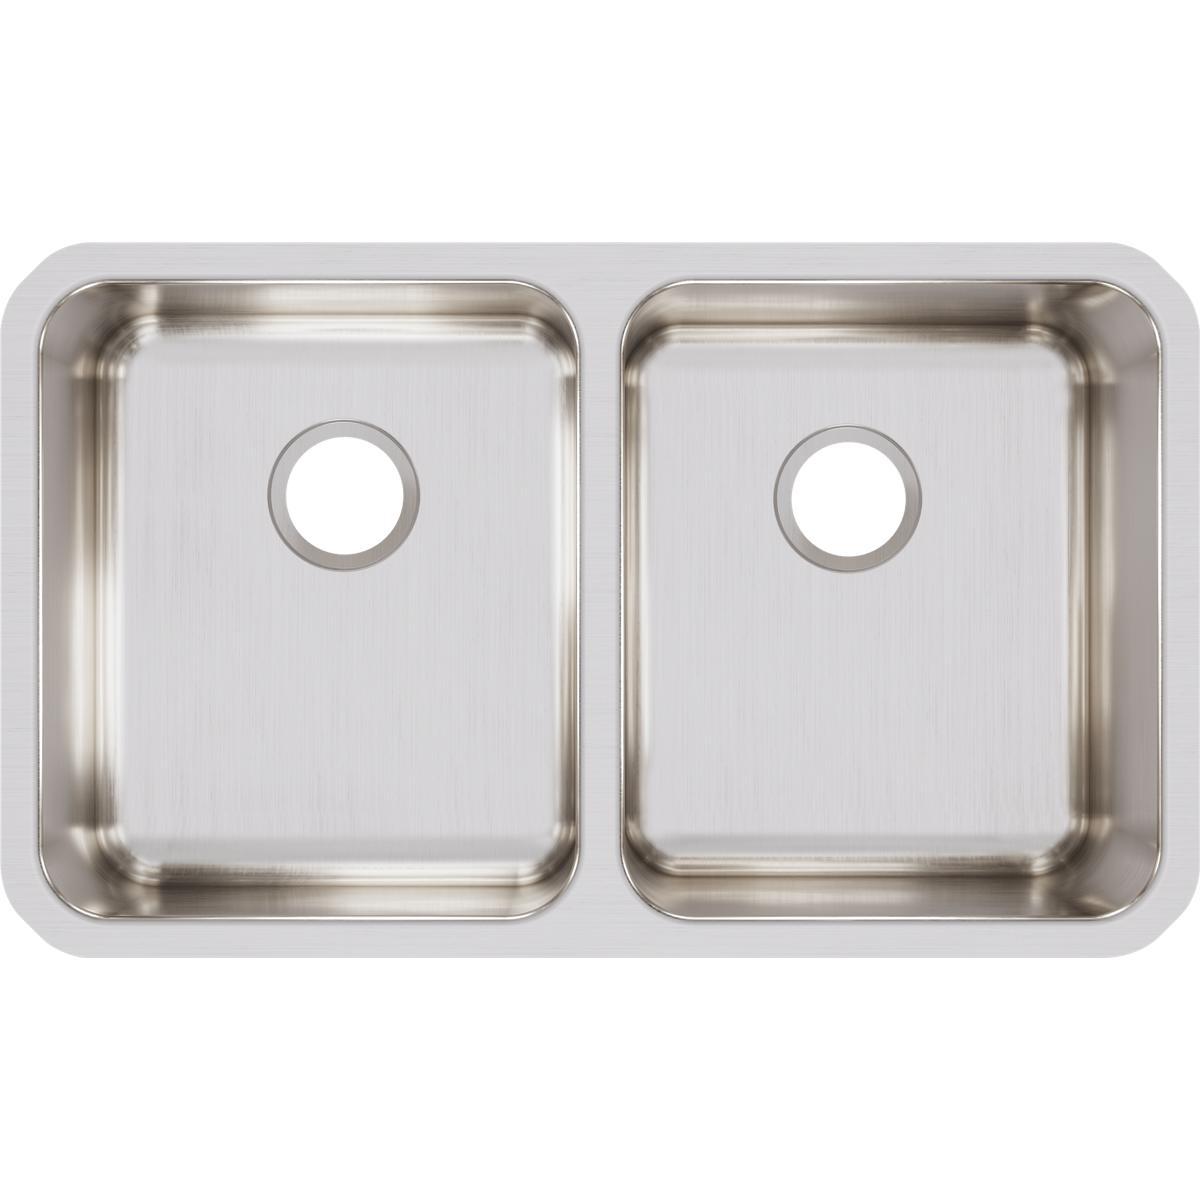 Elkay Lustertone Classic Stainless Steel 30-3/4" x 18-1/2" x 7-7/8", Equal Double Bowl Undermount Sink-DirectSinks